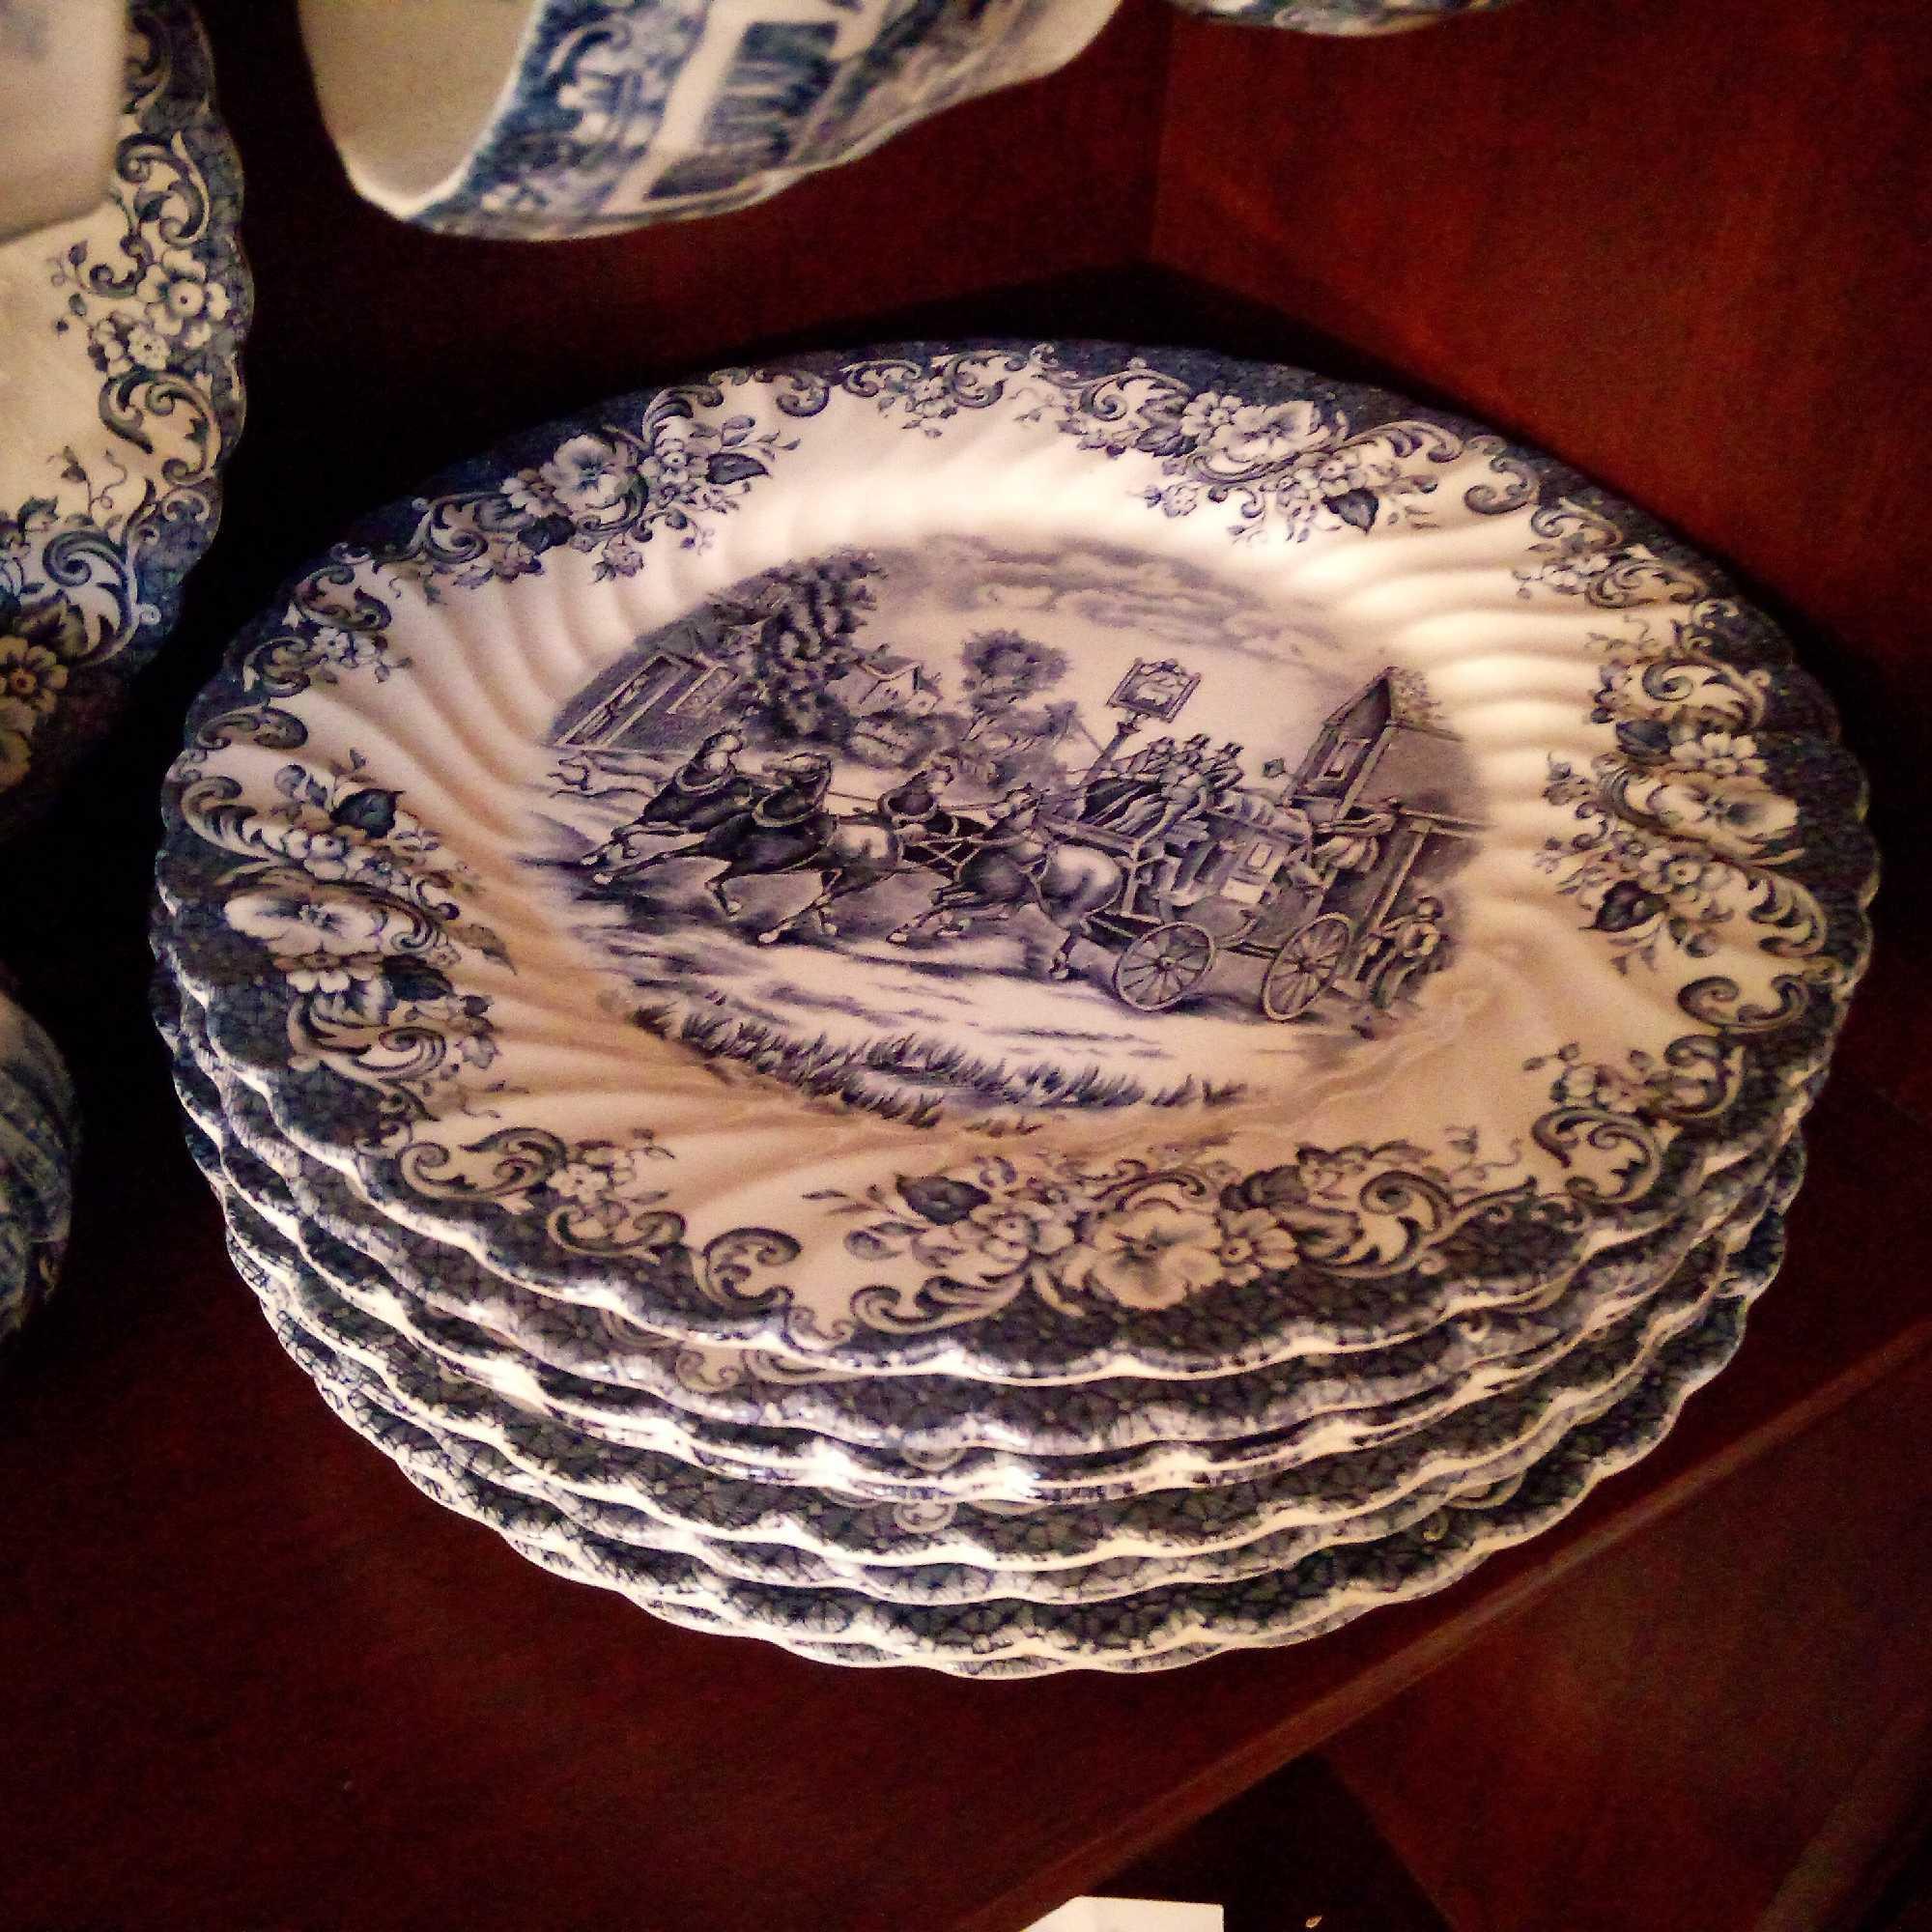 GORGEOUS COACHING SCENES BY JOHNSON BROTHERS IRONSTONE HUNTING COUNTRY CHINA SET